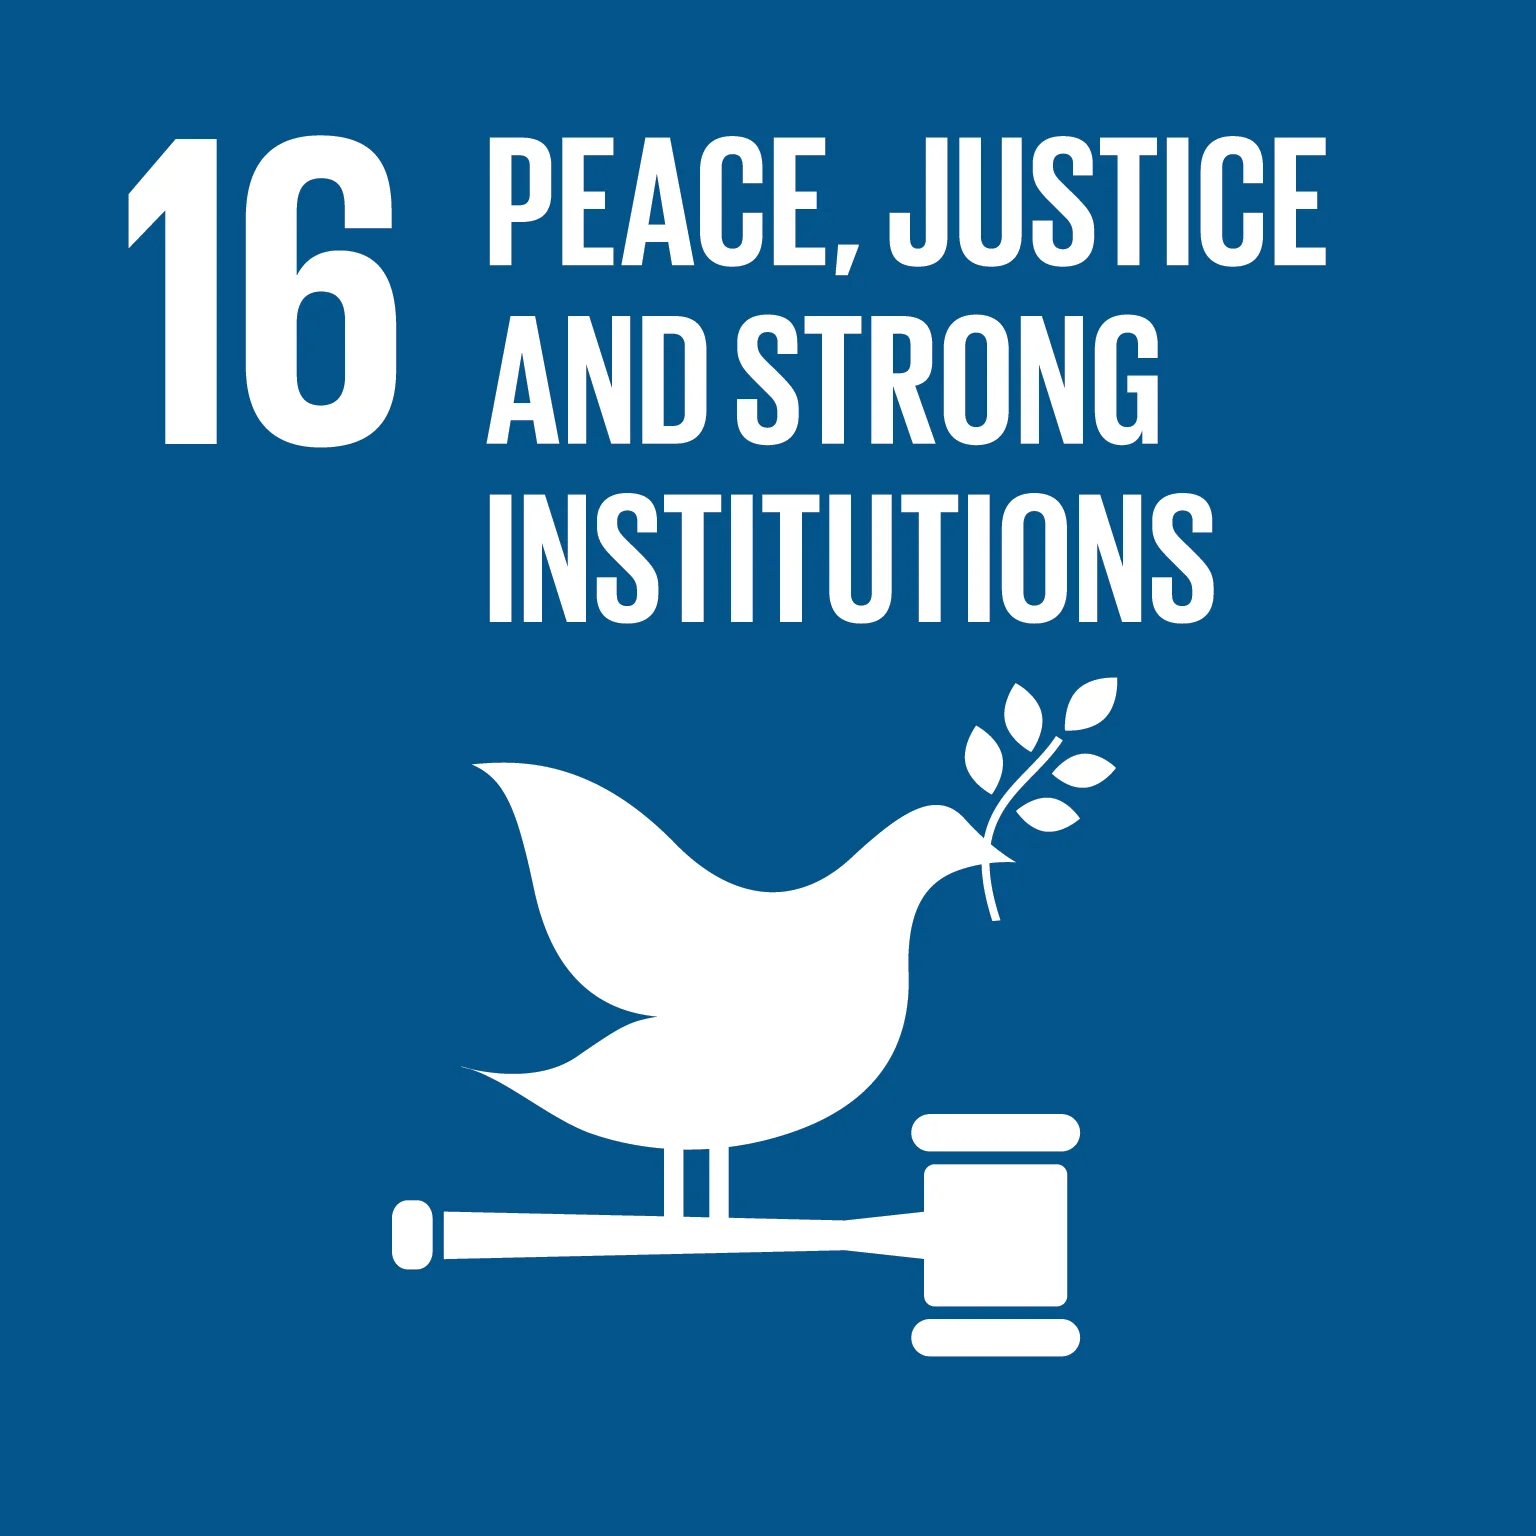 SDG 16. Peace, justice and strong institutions